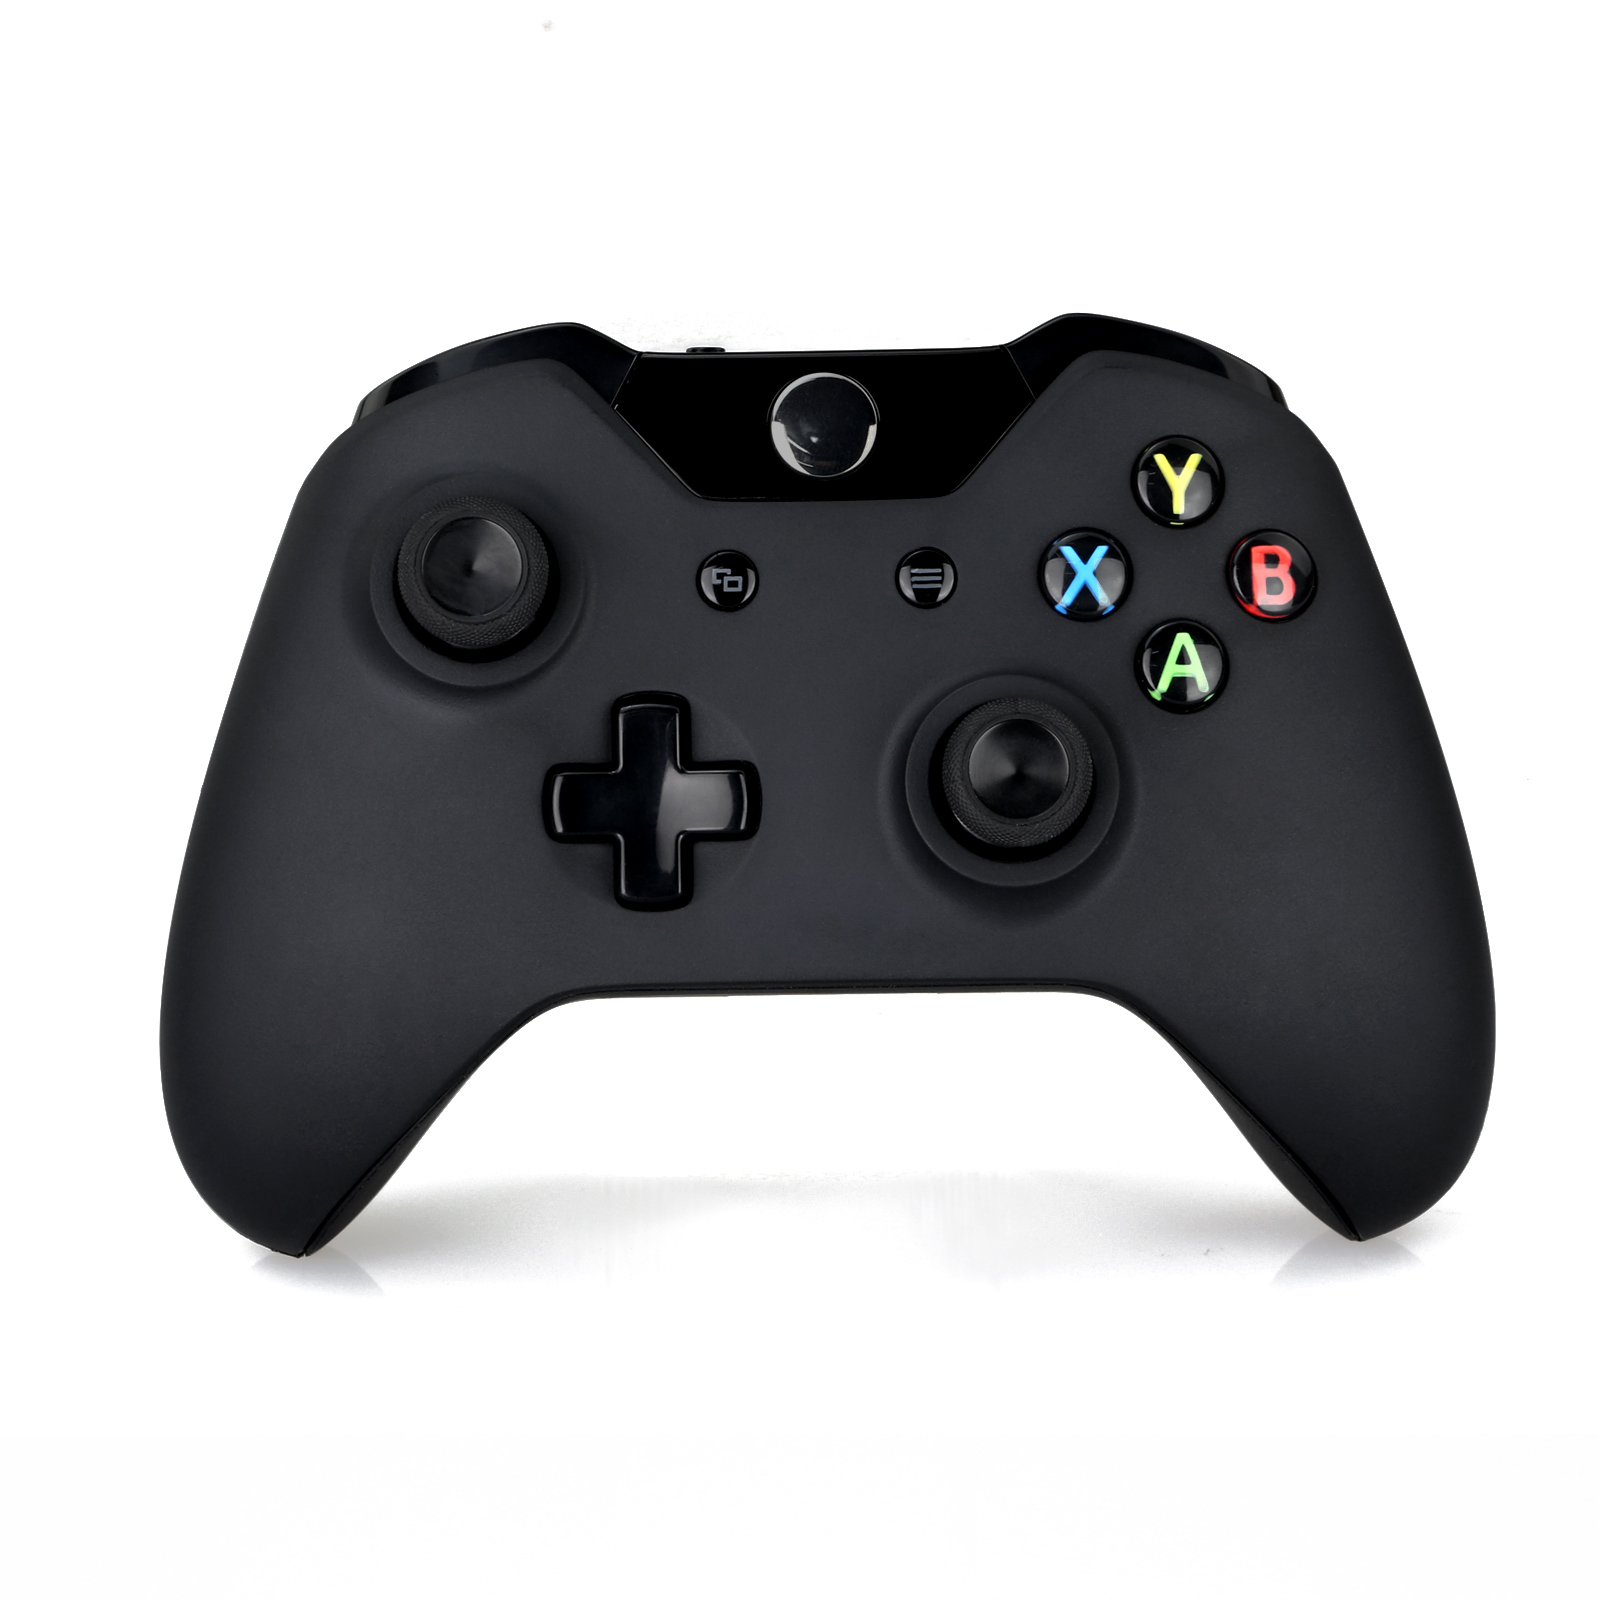 New Xbox One Wireless Game Gamepad Controller For ...